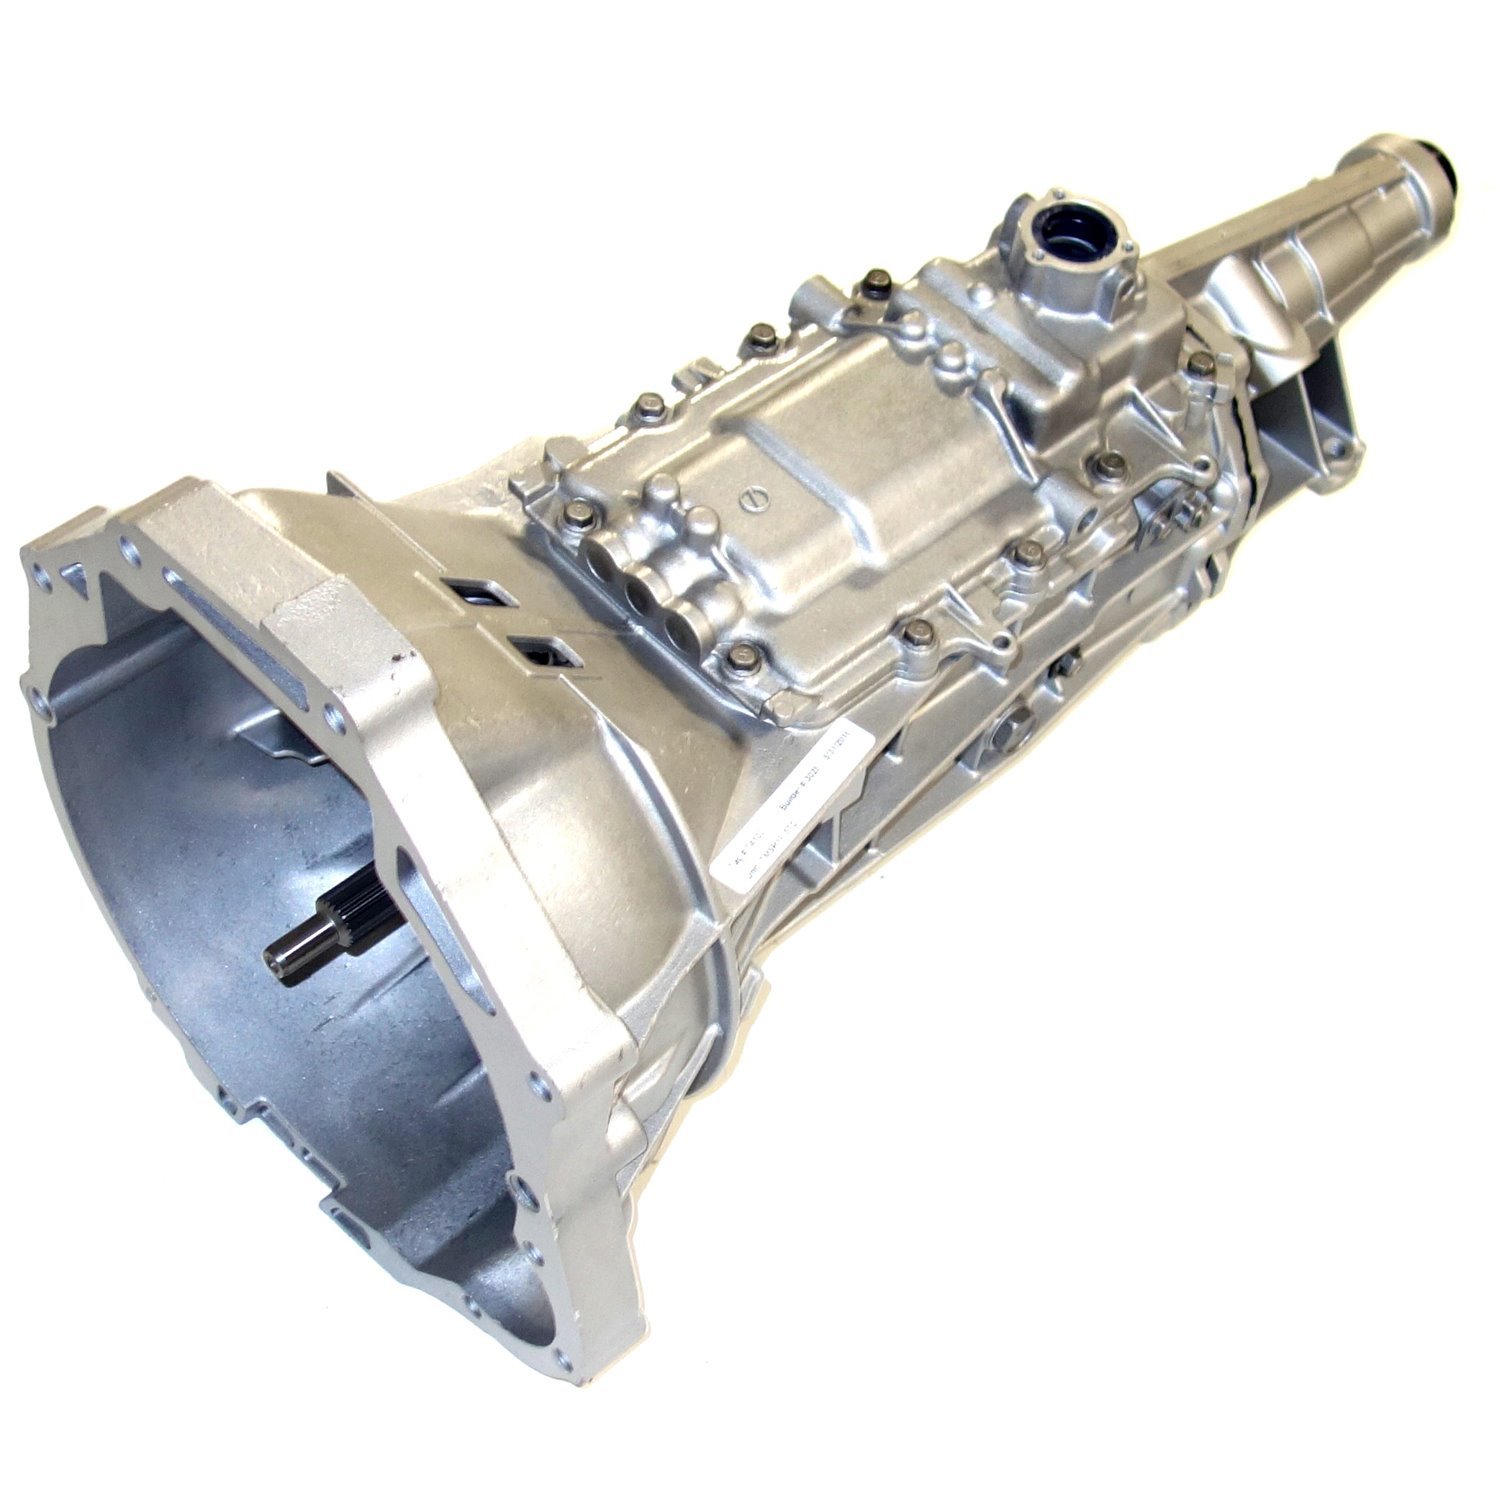 Remanufactured M5R1 Manual Transmission for 95-97 Ranger & B-series 3.0L, 2WD, 7 Tooth, White